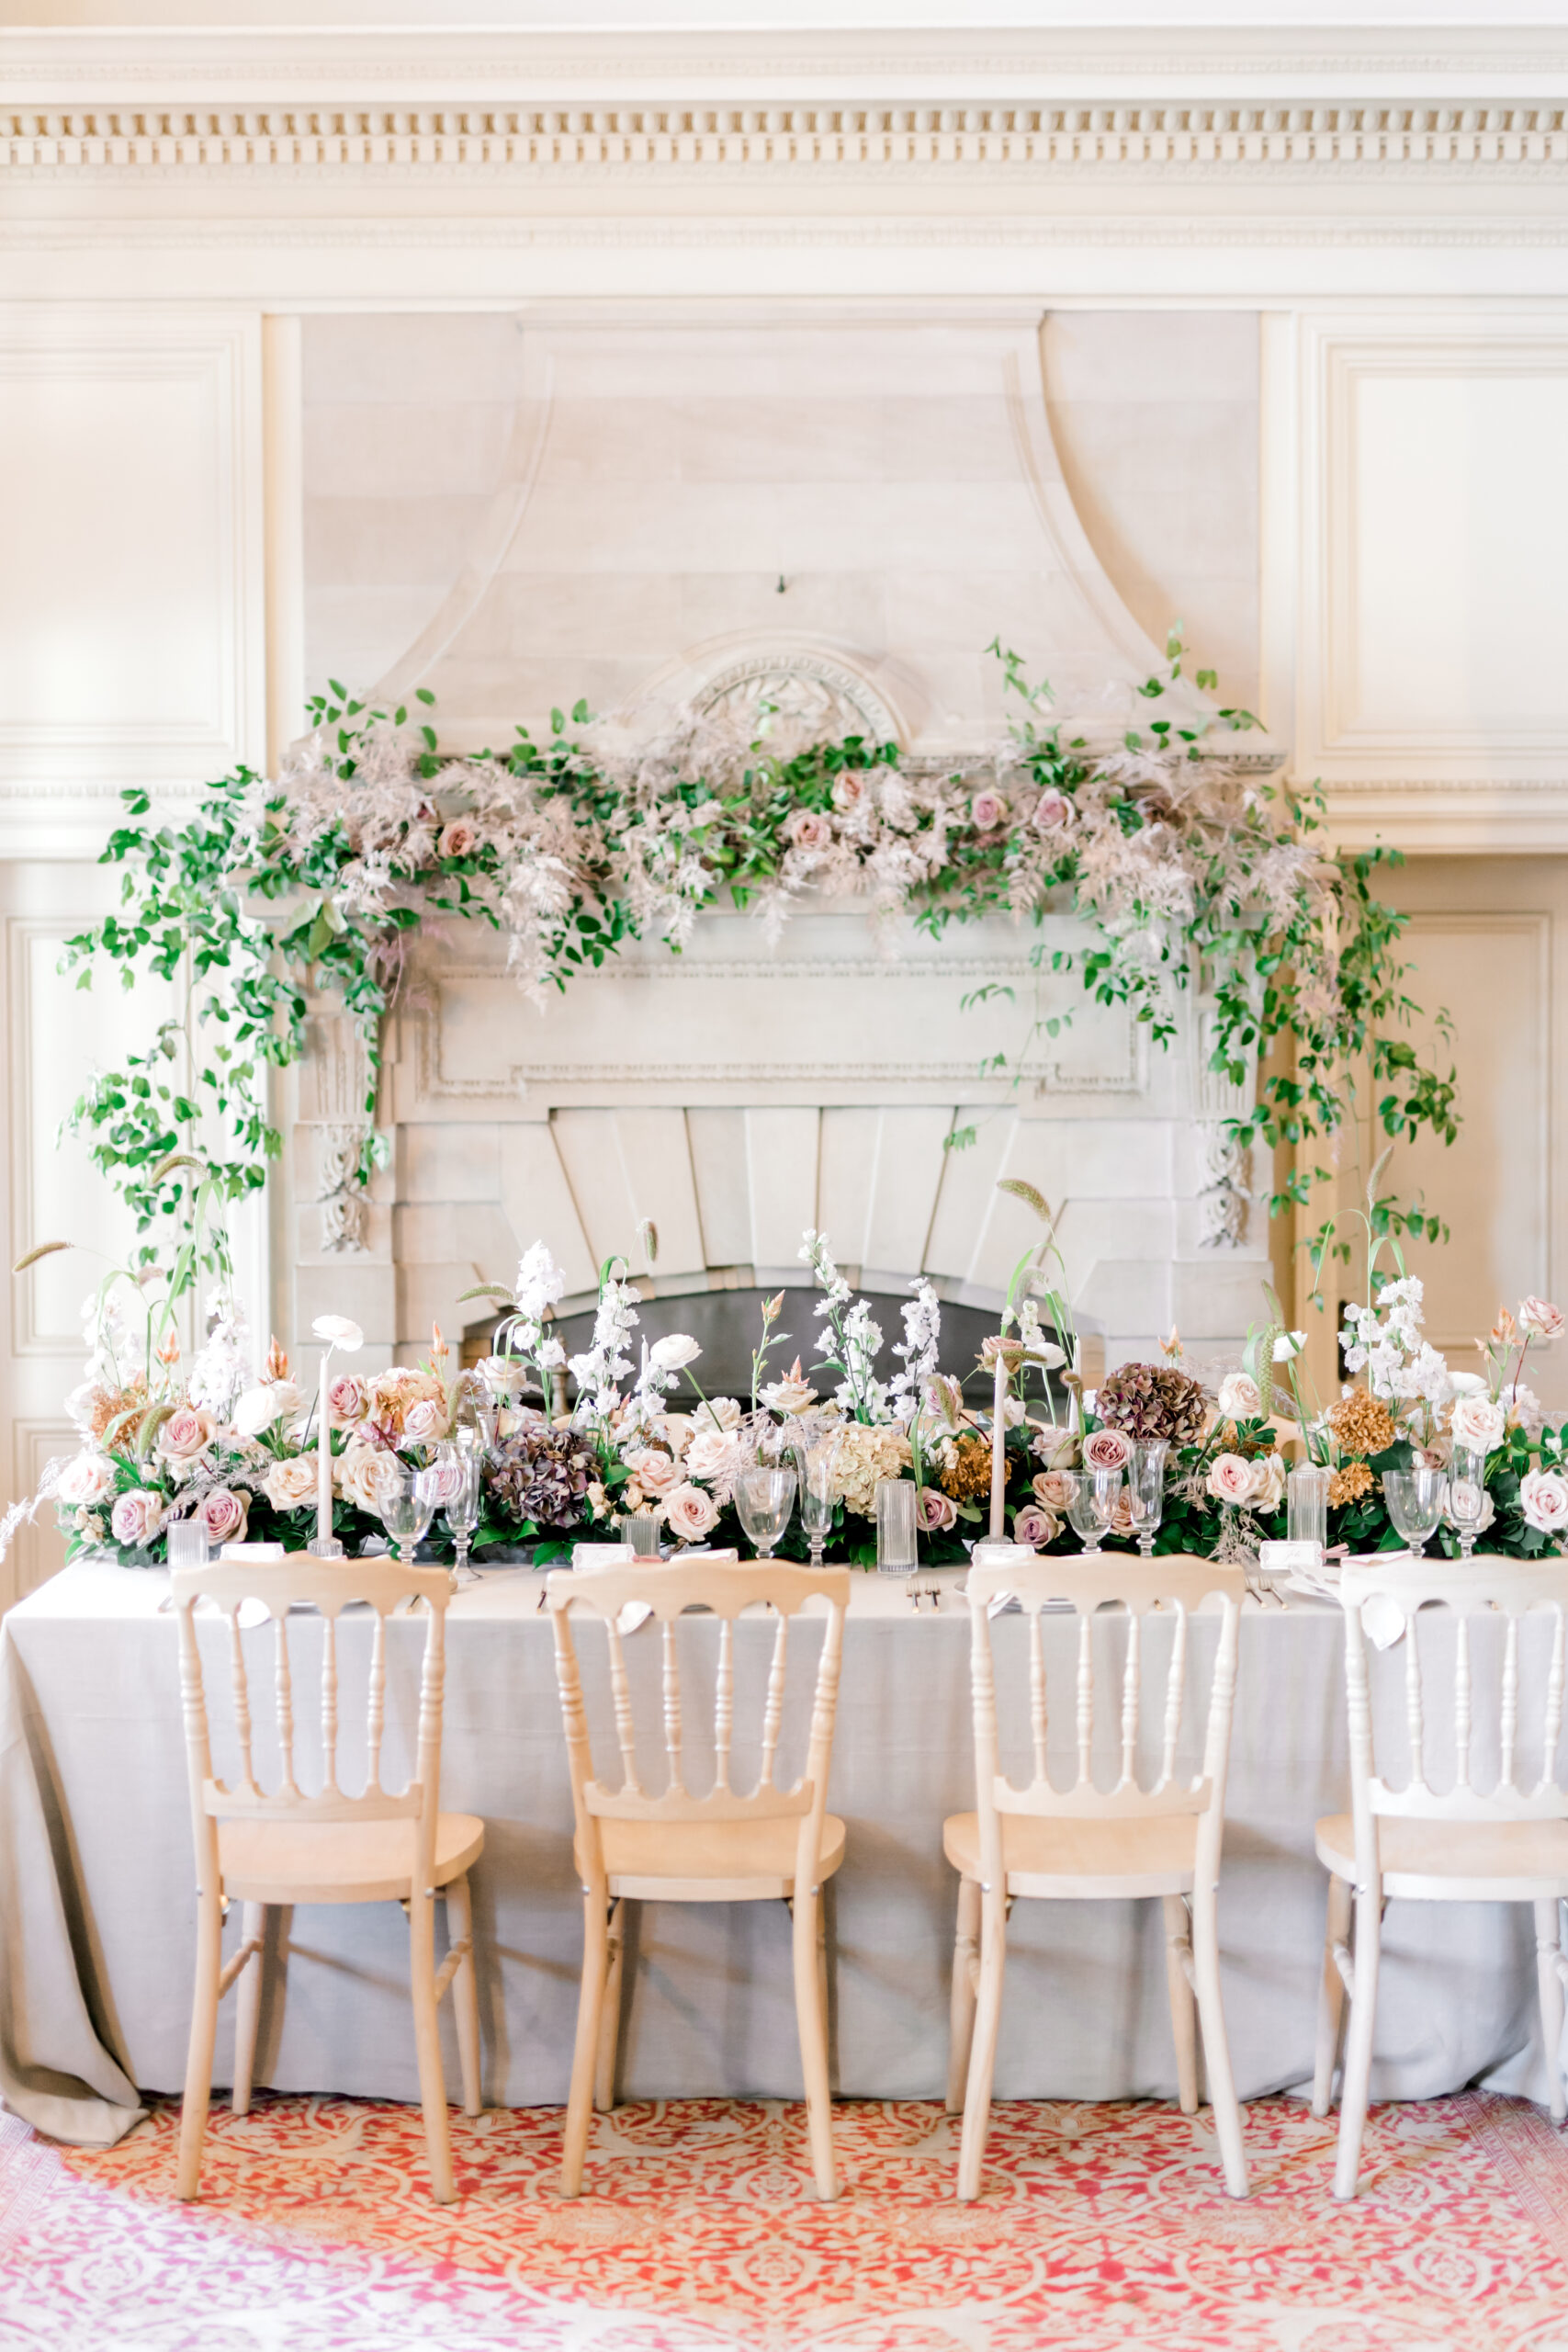 Large floral installation over a fireplace with a tablescape in front, ready for a wedding